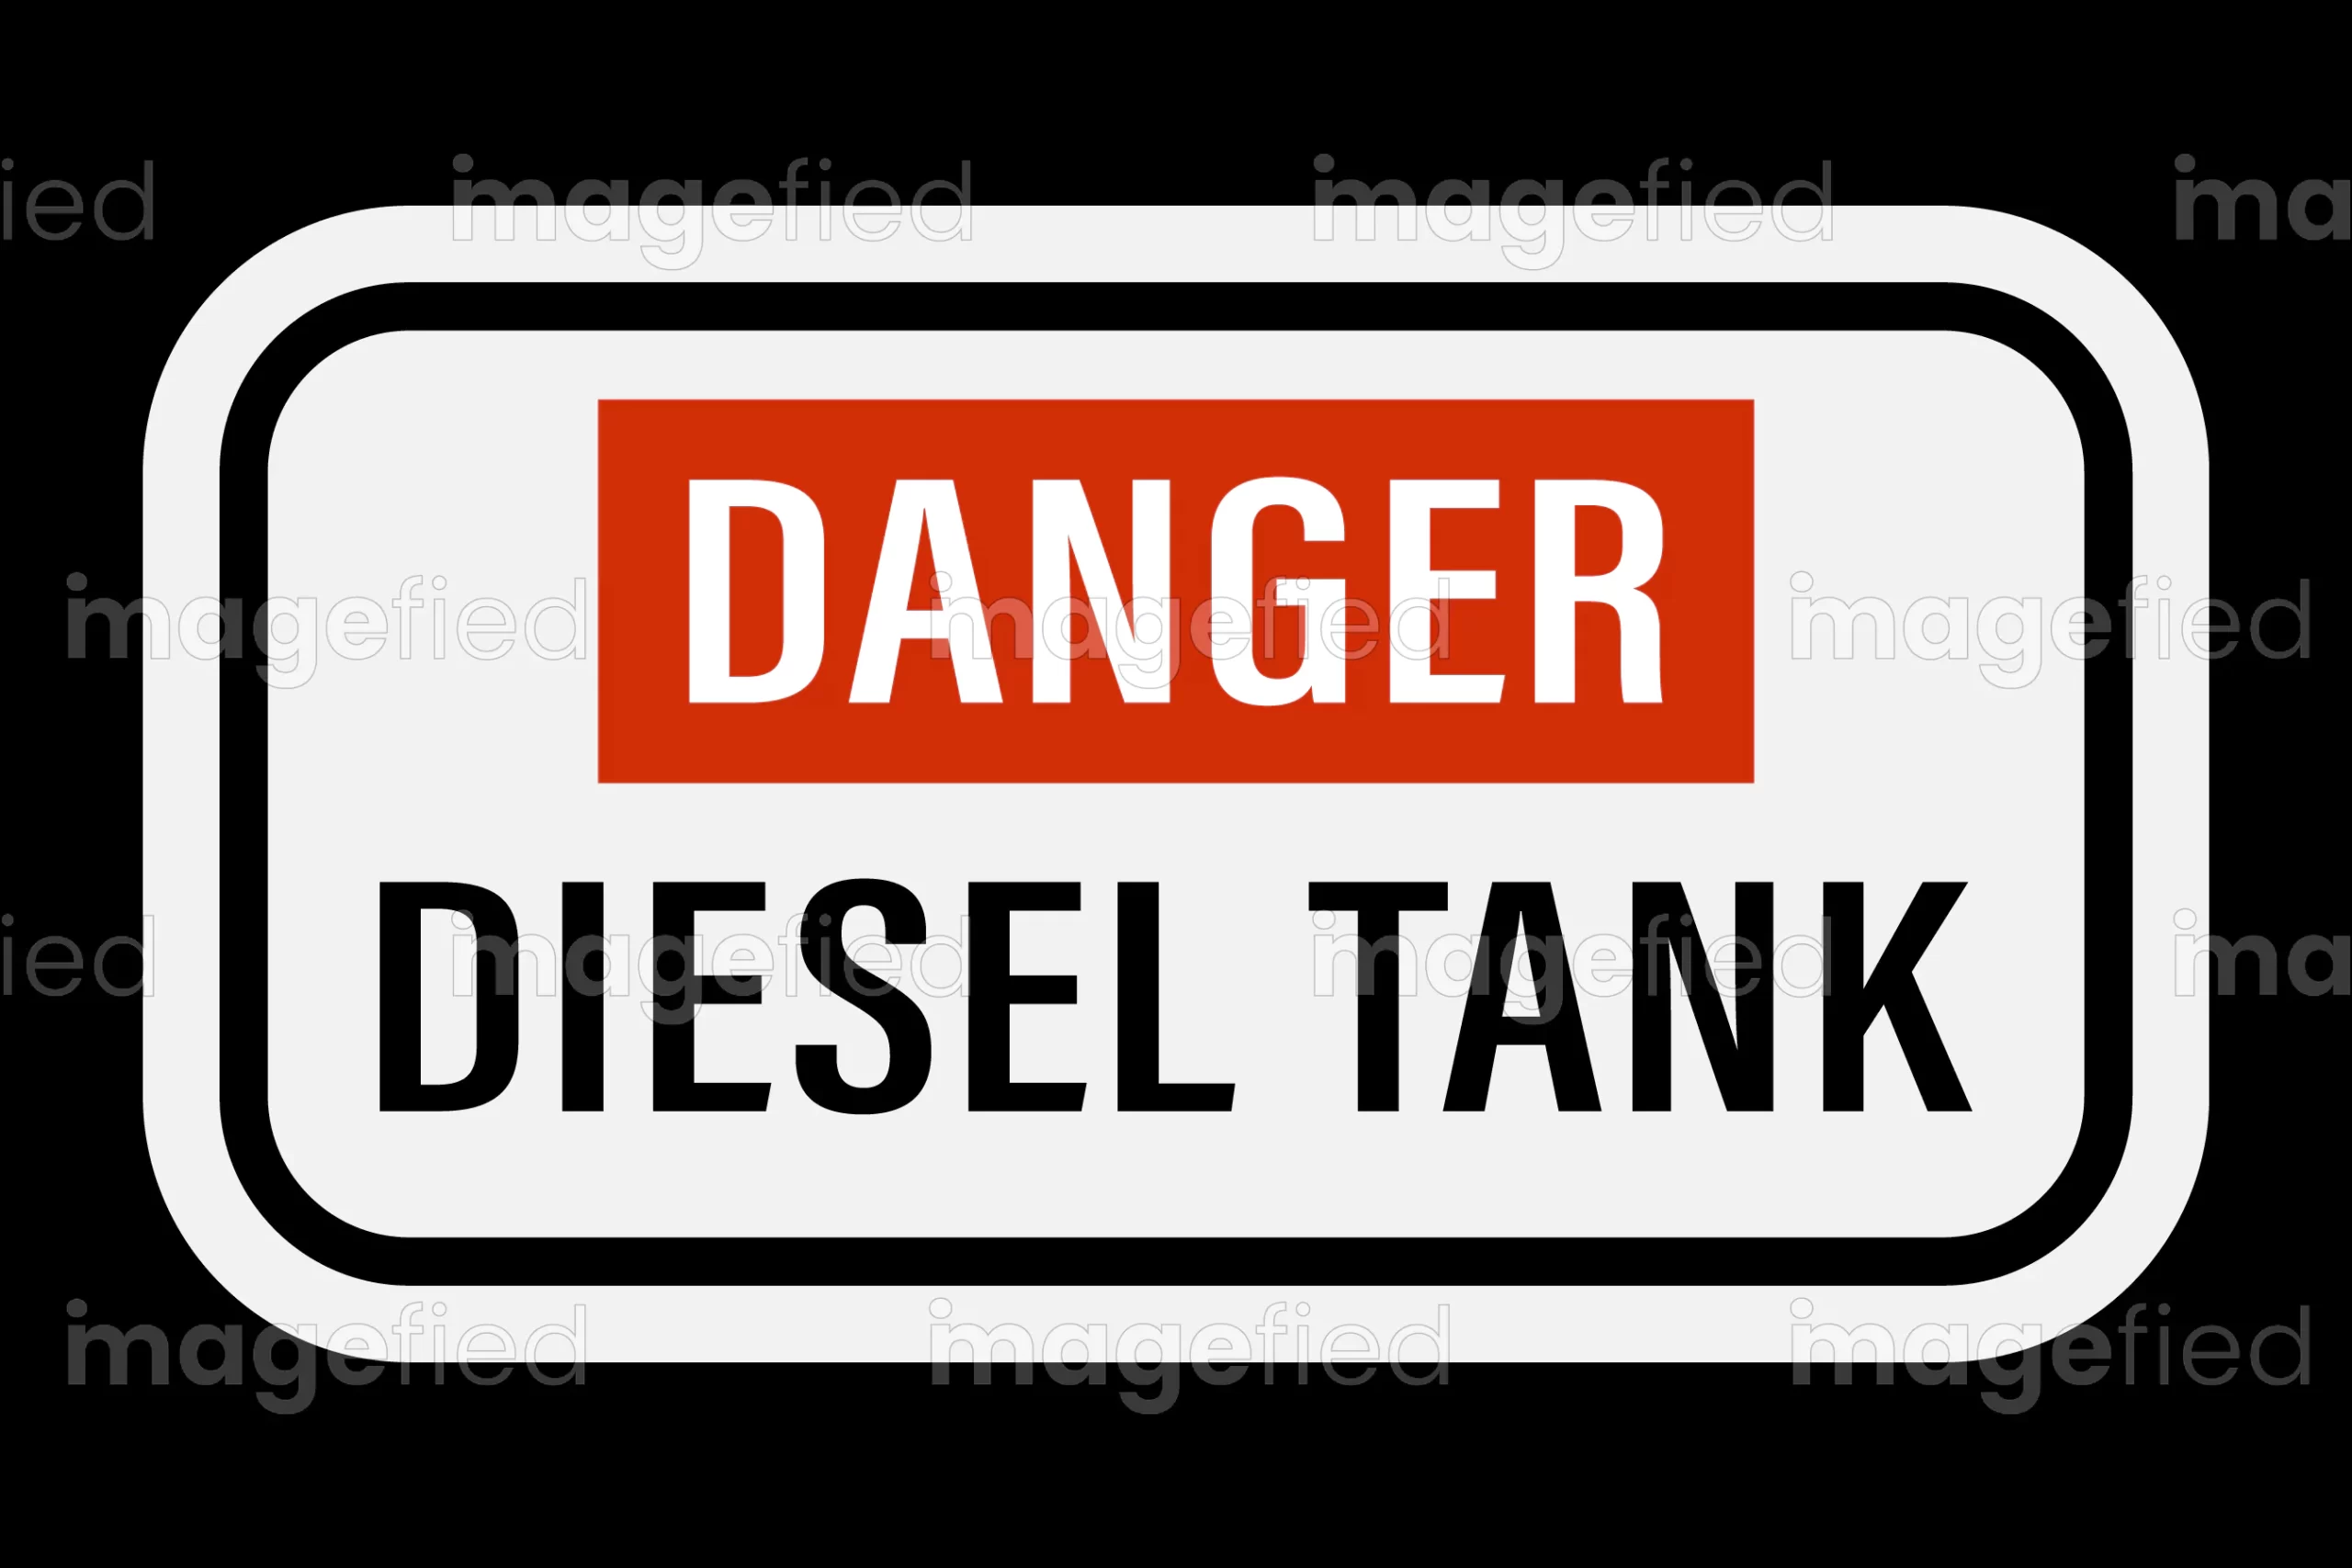 Diesel tank sign stickers, fuel tank labels signage for safety and compliance